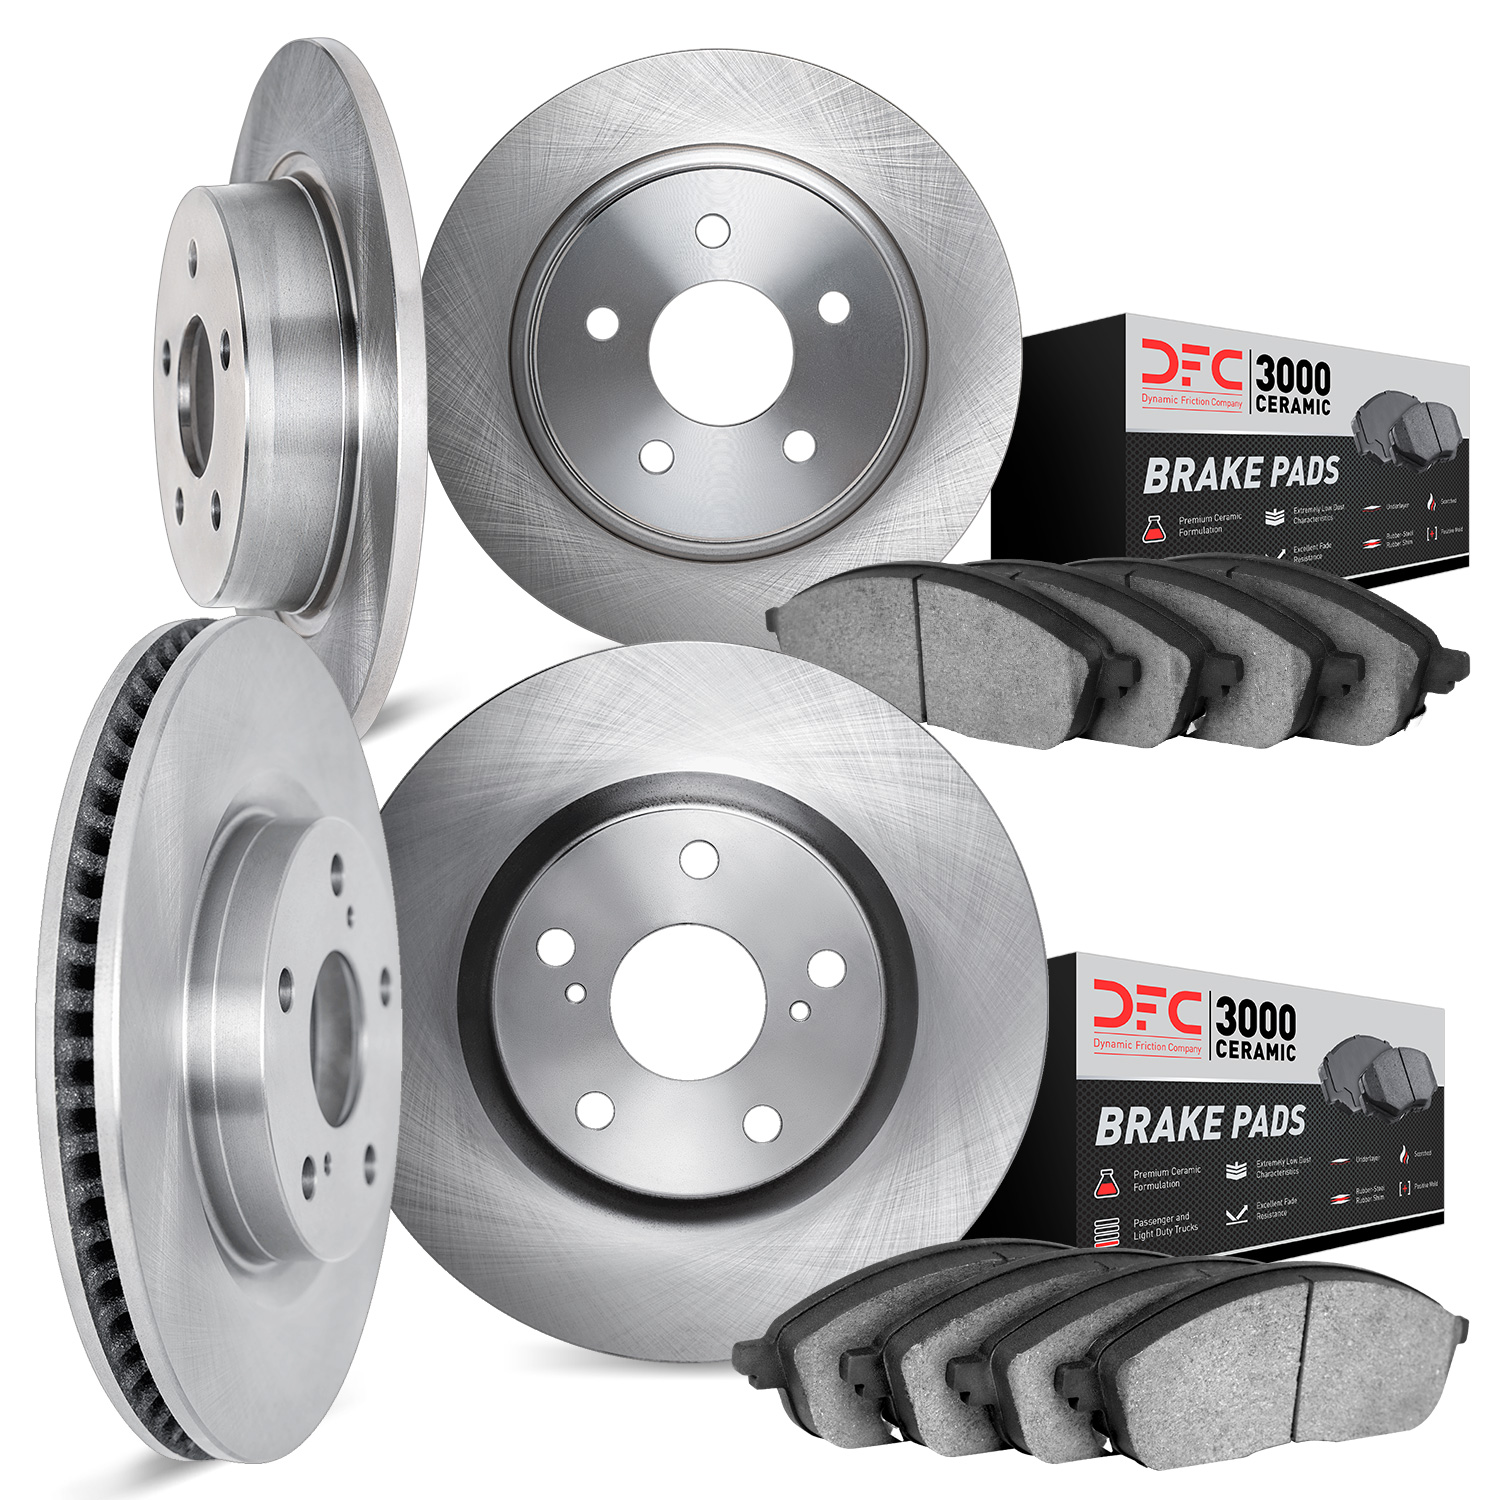 6304-76055 Brake Rotors with 3000-Series Ceramic Brake Pads Kit, 2004-2010 Lexus/Toyota/Scion, Position: Front and Rear